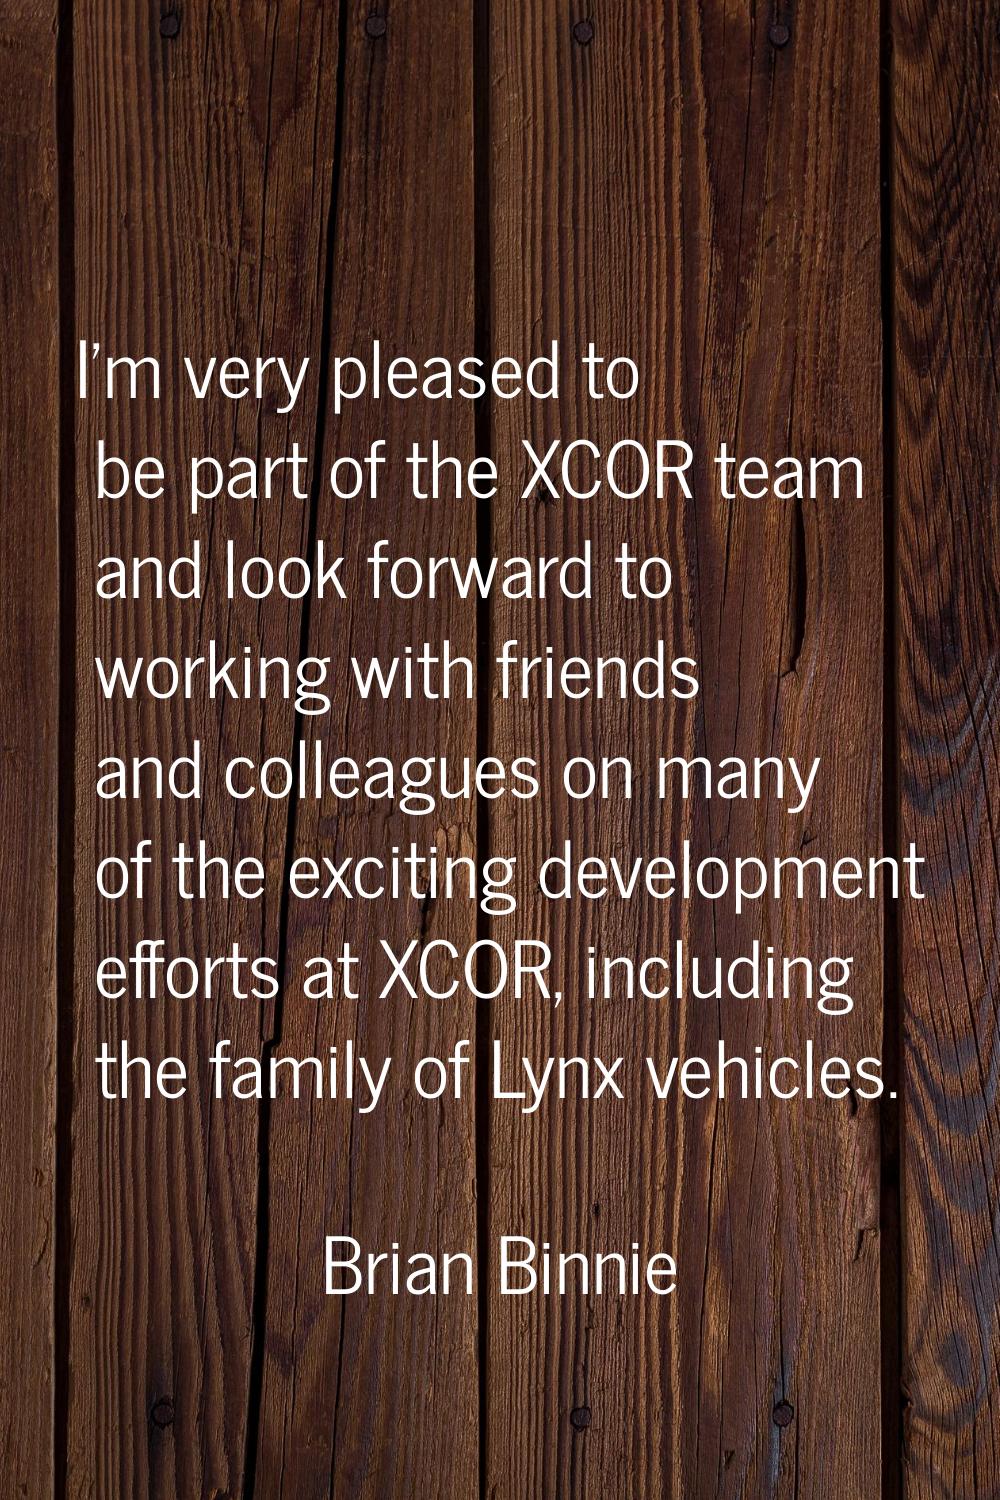 I'm very pleased to be part of the XCOR team and look forward to working with friends and colleague